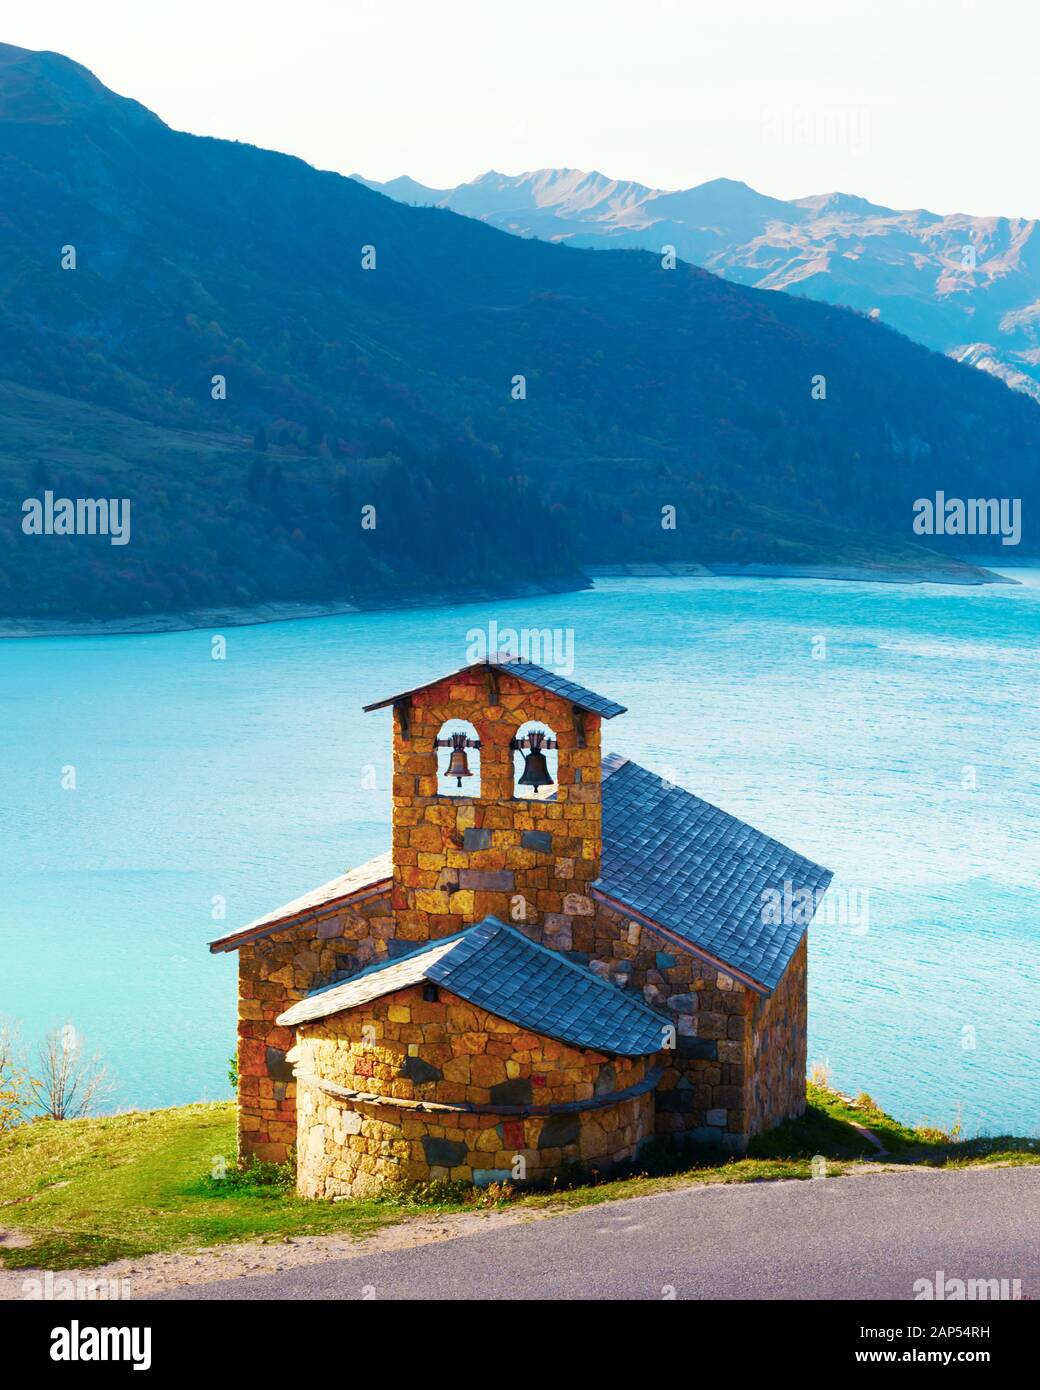 Picturesque view of stone chapel on Roselend lake coast (Lac de Roselend) in France Alps (Auvergne-Rhone-Alpes). Landscape photography Stock Photo